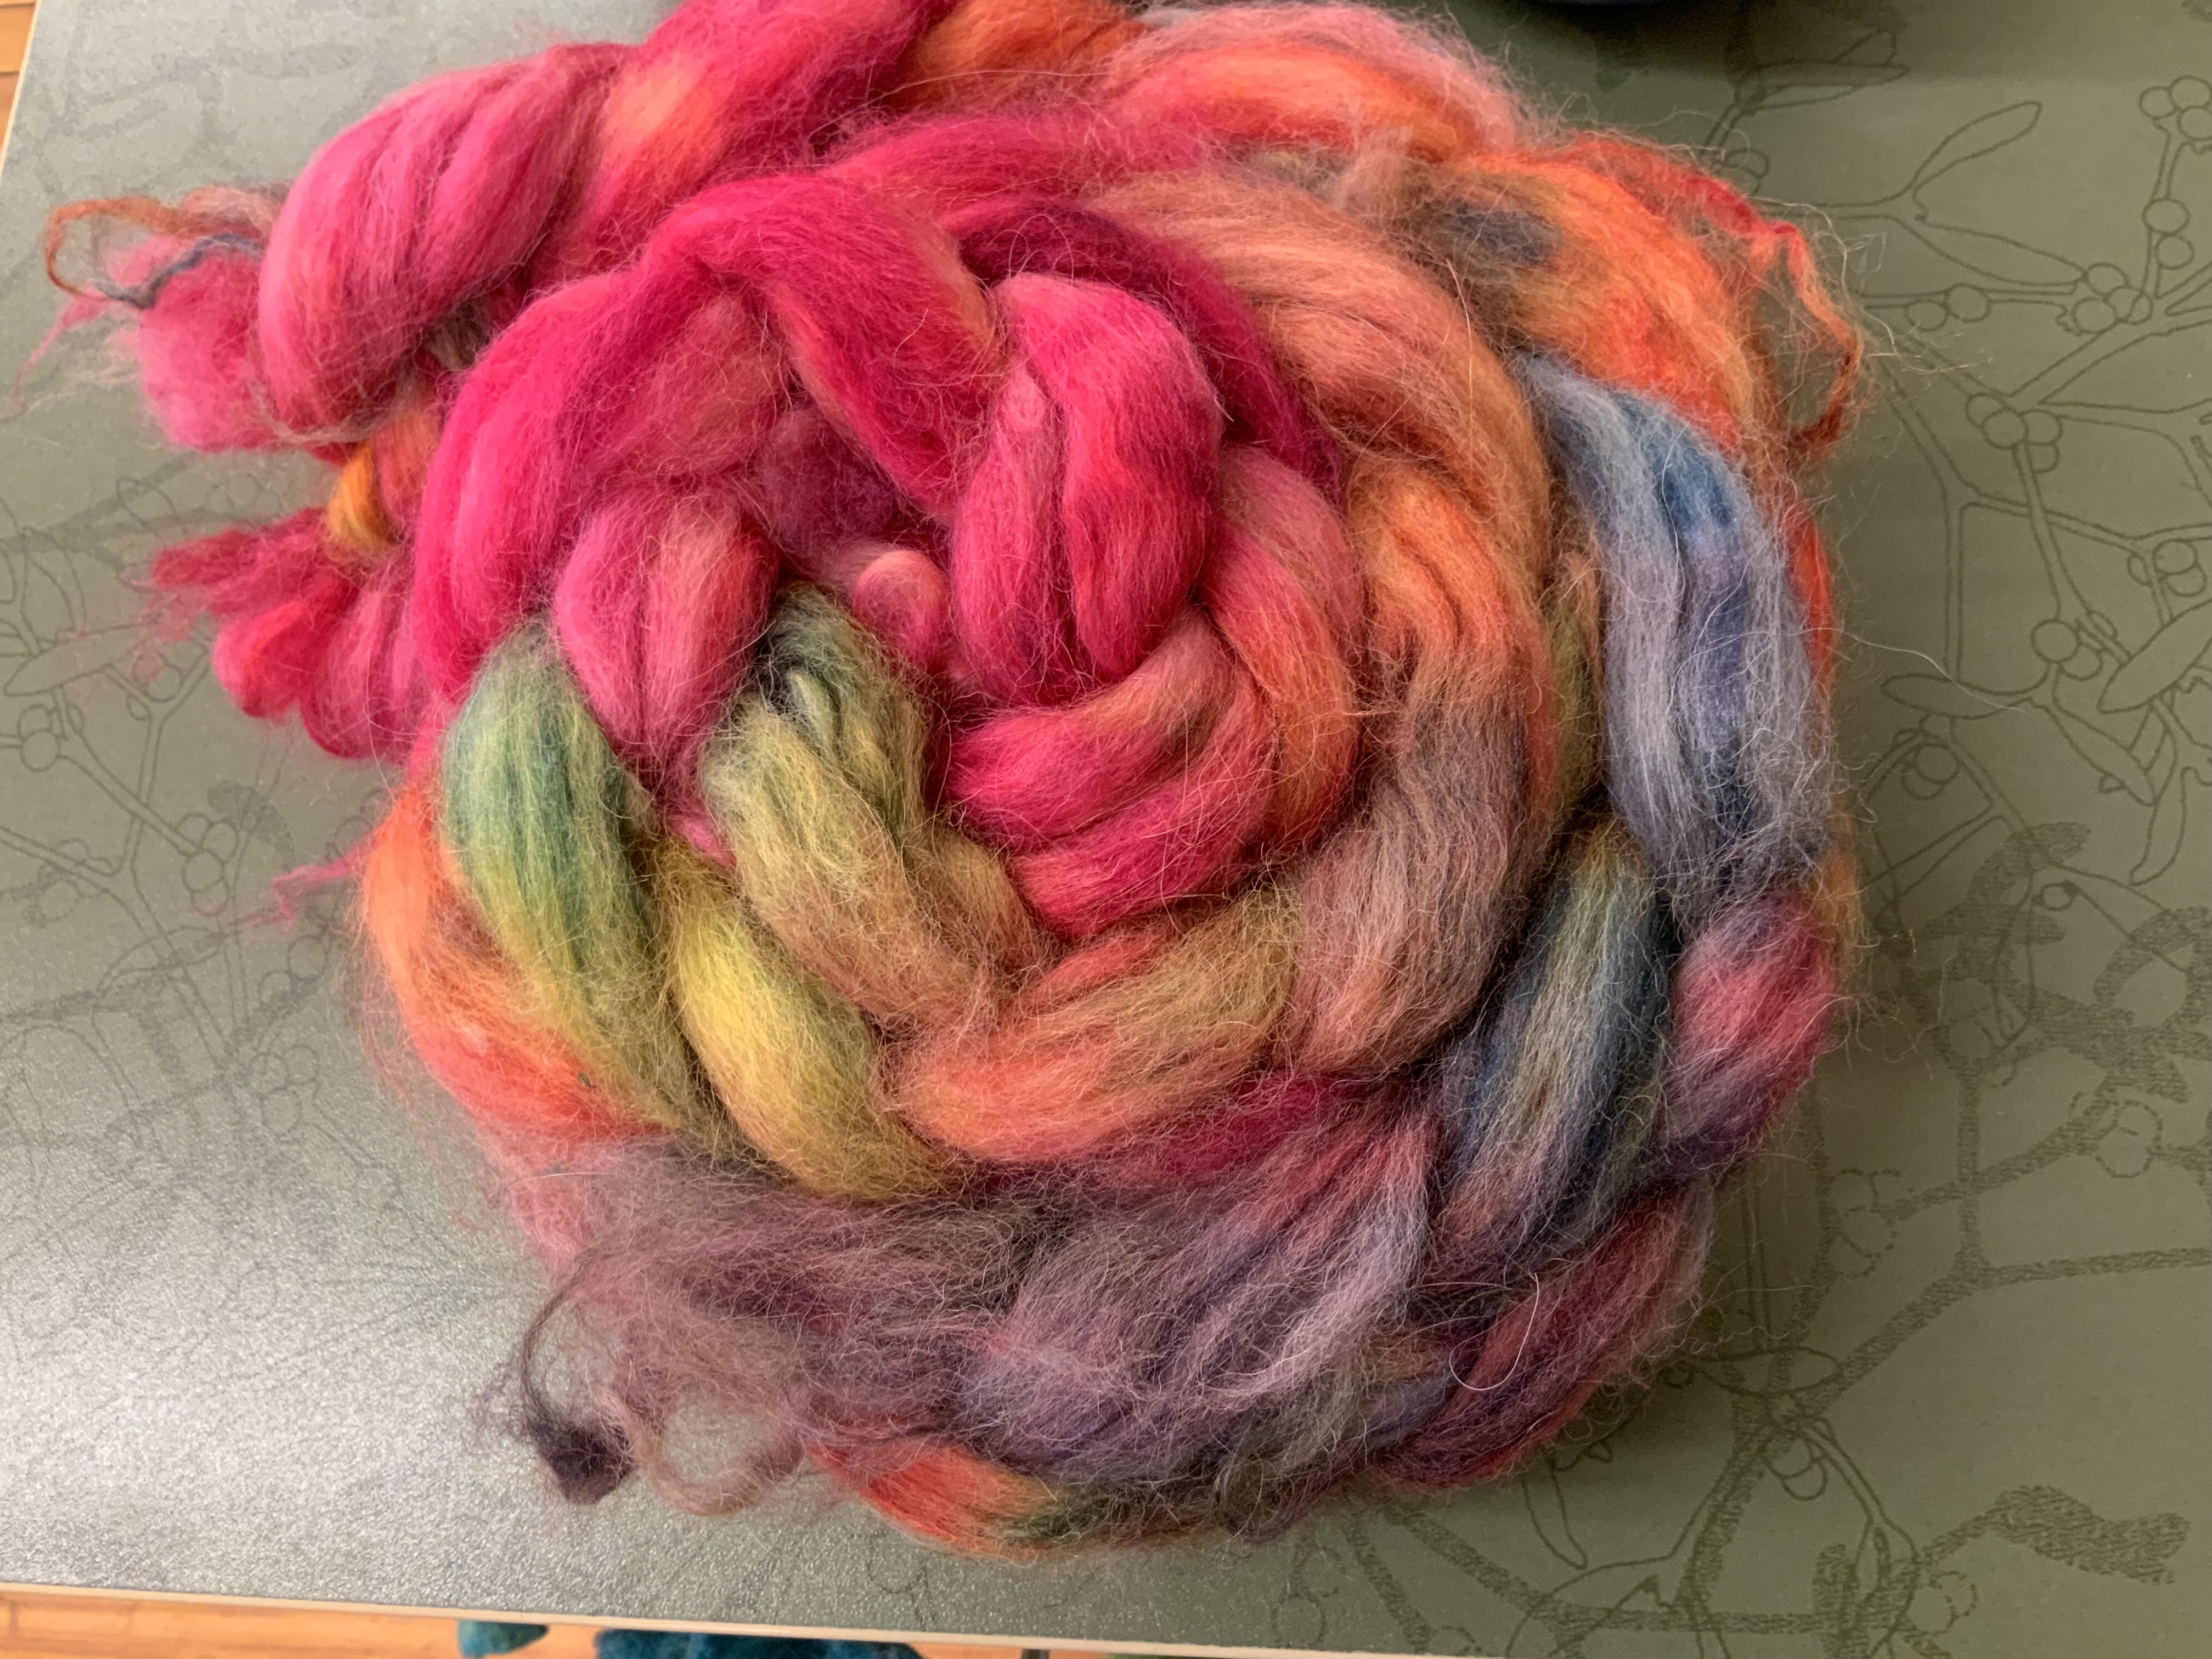 50% Alpaca 50% Tussah Silk Top - Hand-Painted by Bewitching Fibers - 115 g (4.0 oz) Love is Love